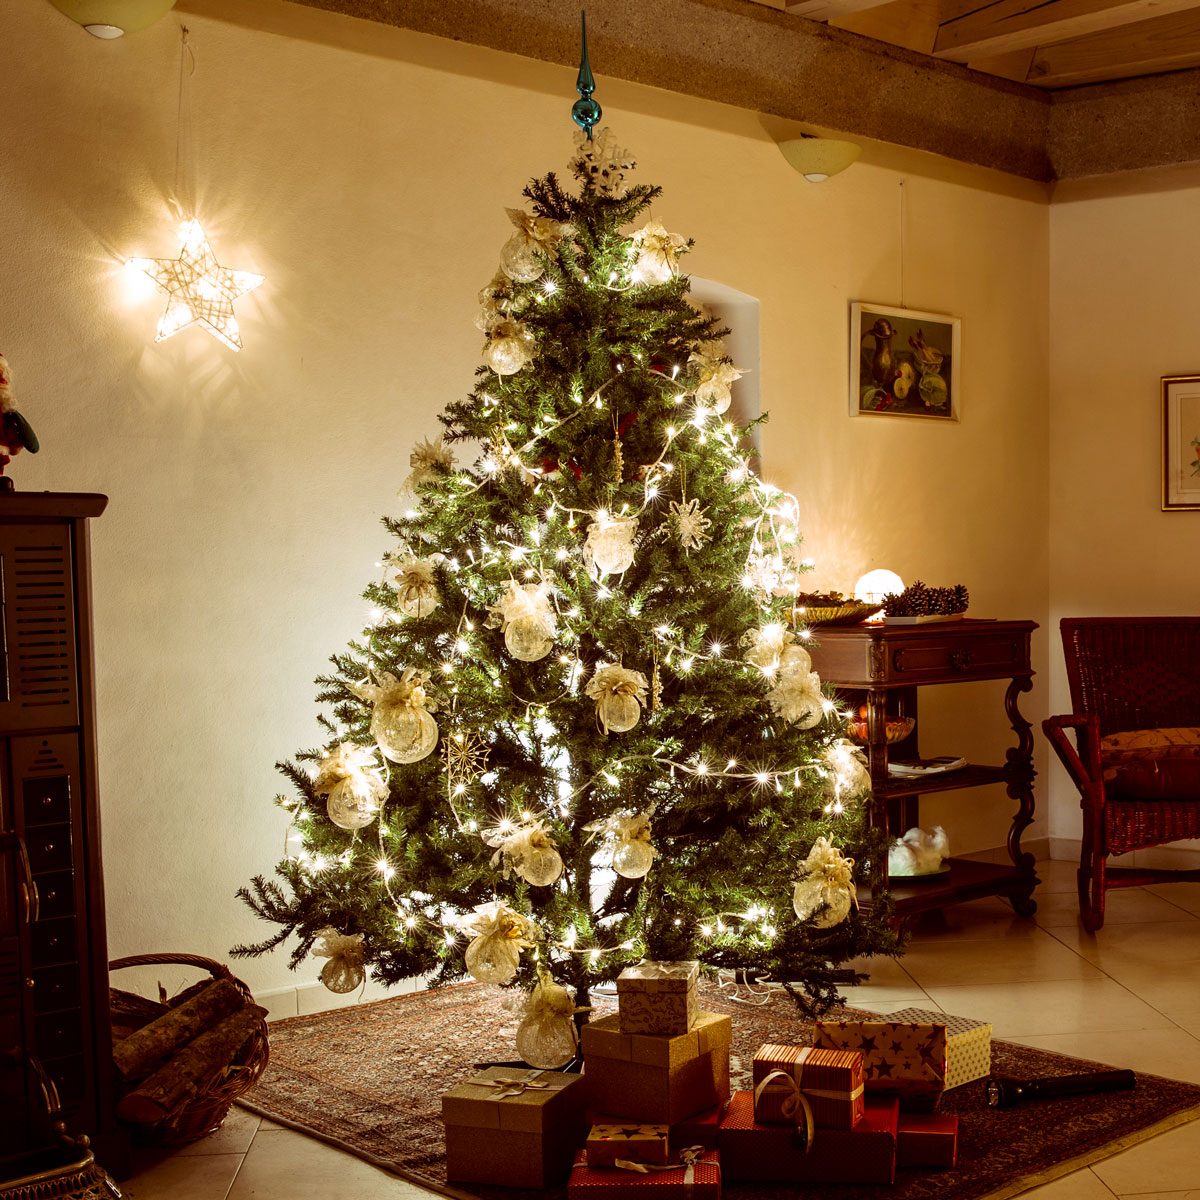 Christmas tree glowing in a house interior